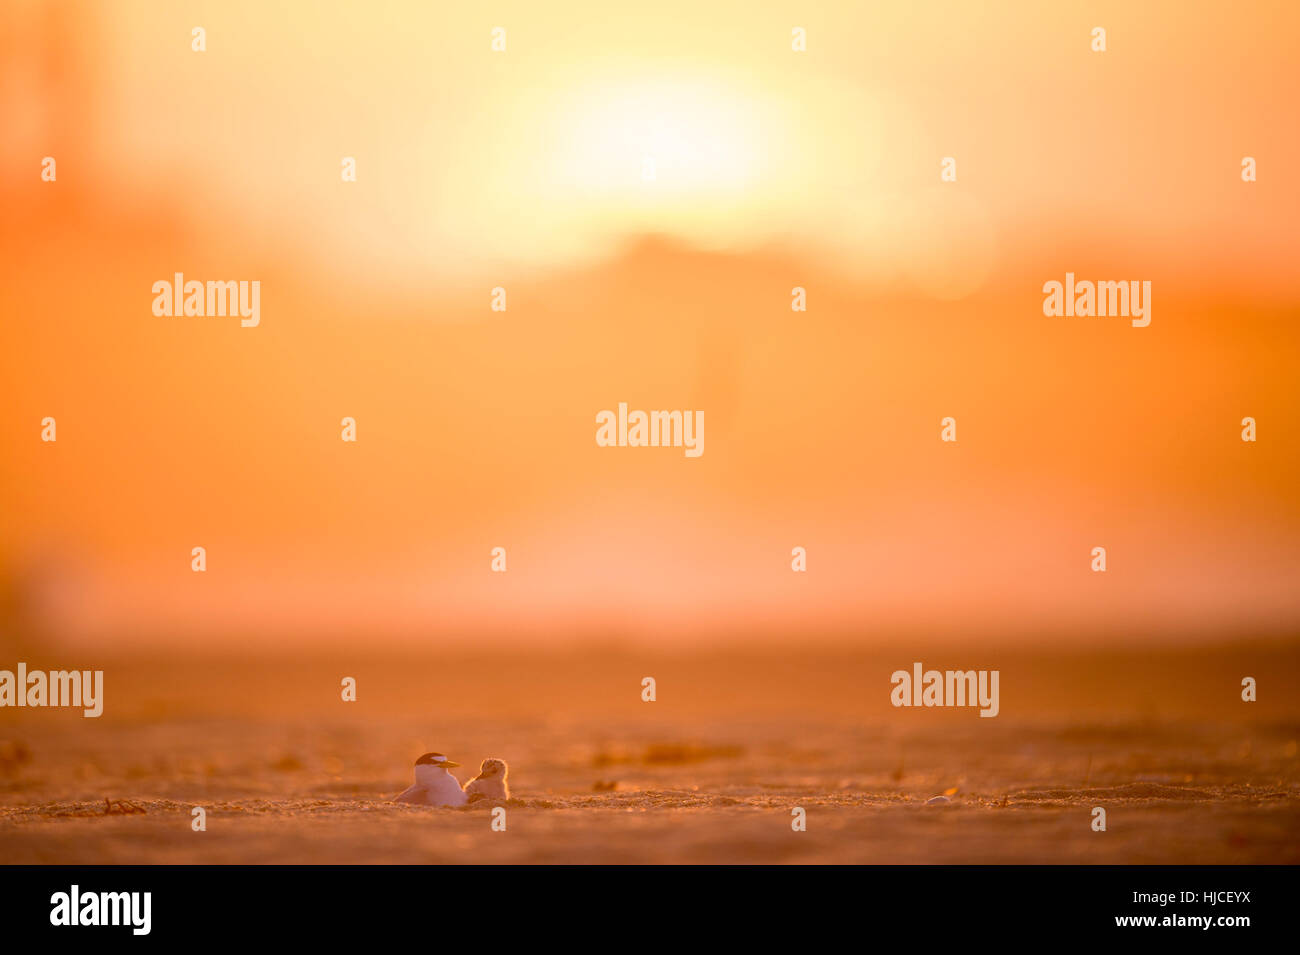 An adult Least Tern keeps an eye on its young tiny chick on a sandy beach bathed in golden morning sunlight. Stock Photo